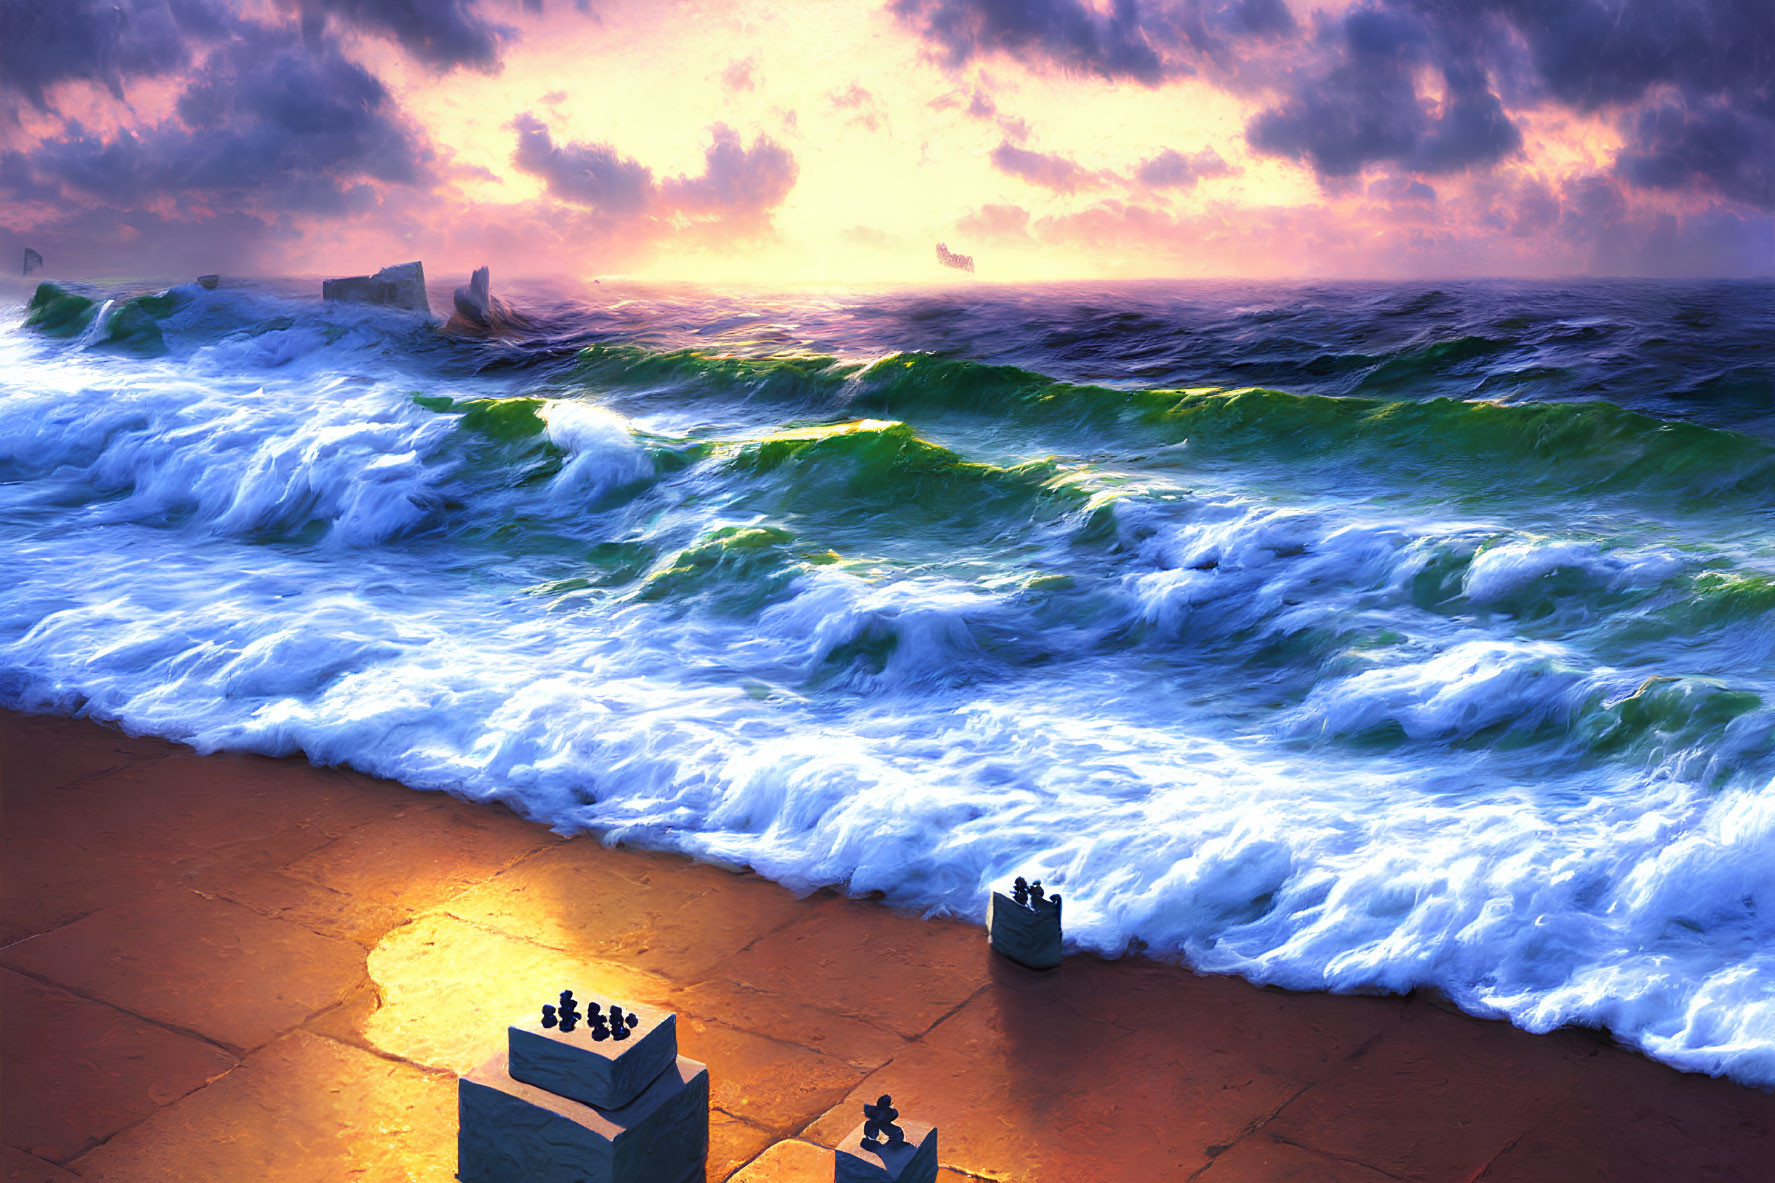 Vibrant sunset over stormy sea with chess pieces on shore